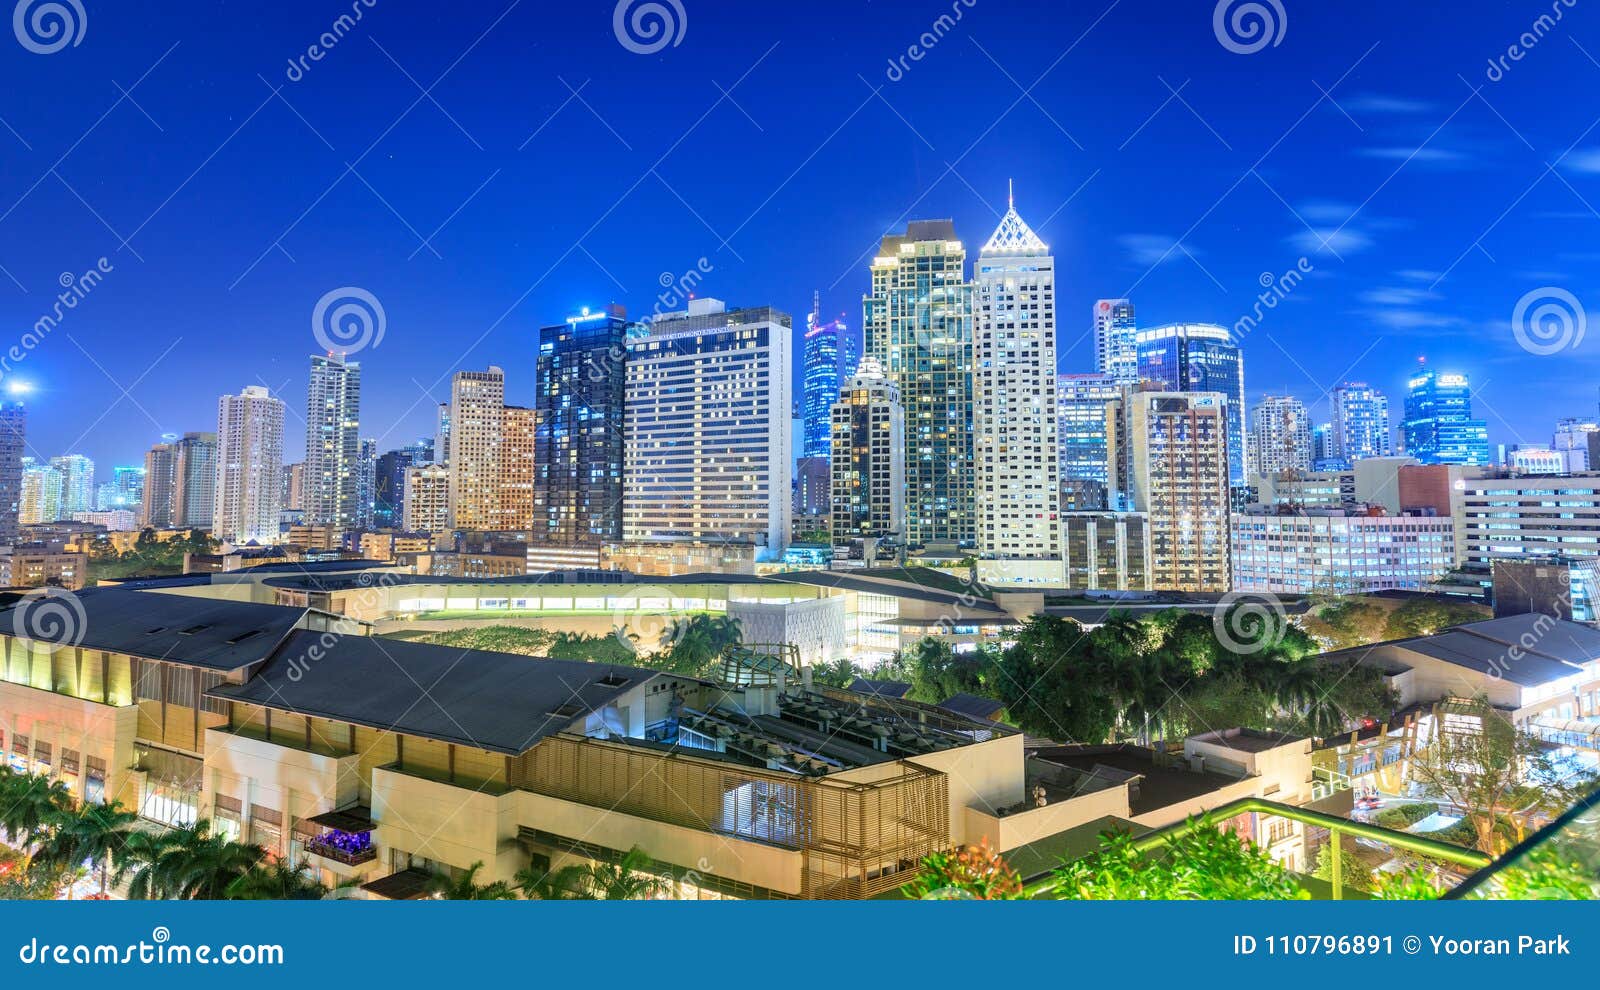 279 Greenbelt Makati Stock Photos - Free & Royalty-Free Stock Photos from  Dreamstime